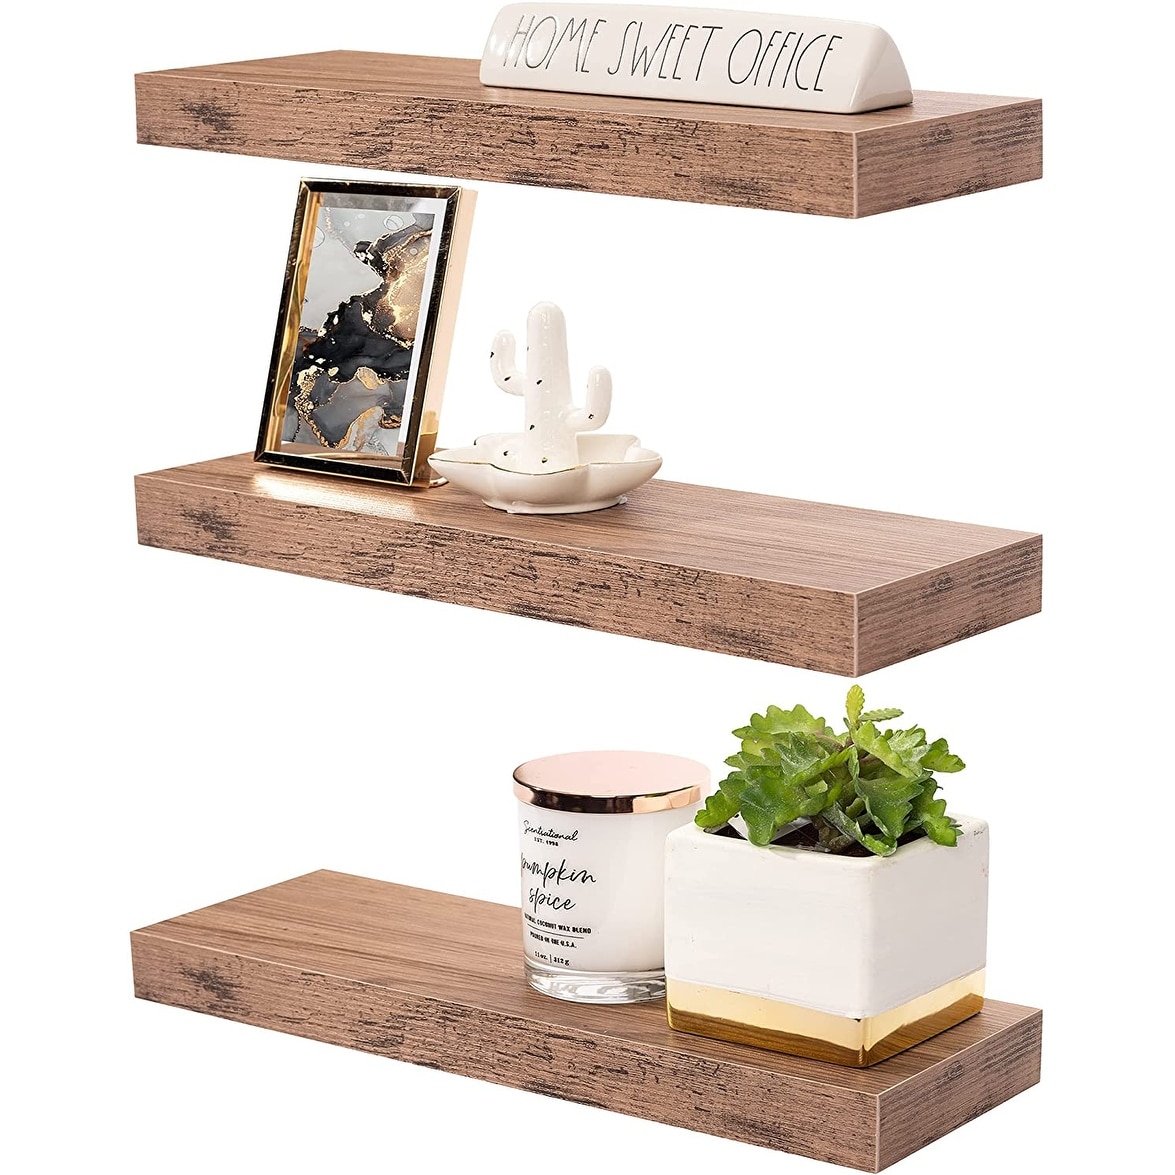 https://ak1.ostkcdn.com/images/products/is/images/direct/477d6f30dcaa4f0524f16e9b0e9cf6e4ce3d65b7/Floating-Shelf-Set%2C-Rustic-Wood-Beach-Style-Hanging-Wall-Shelves.jpg